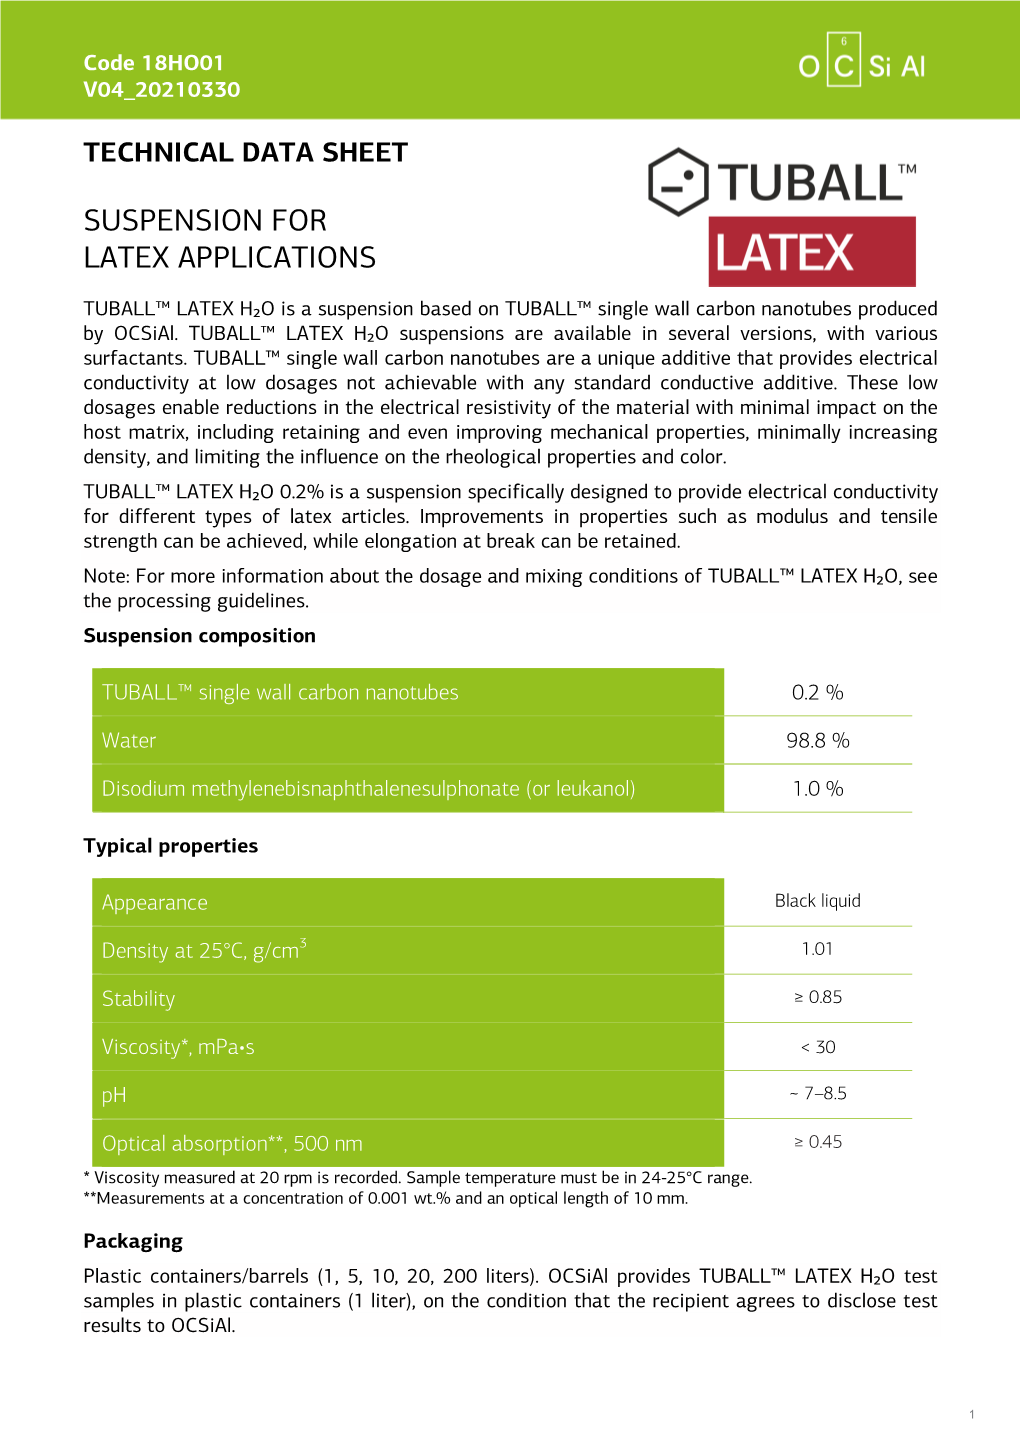 Suspension for Latex Applications